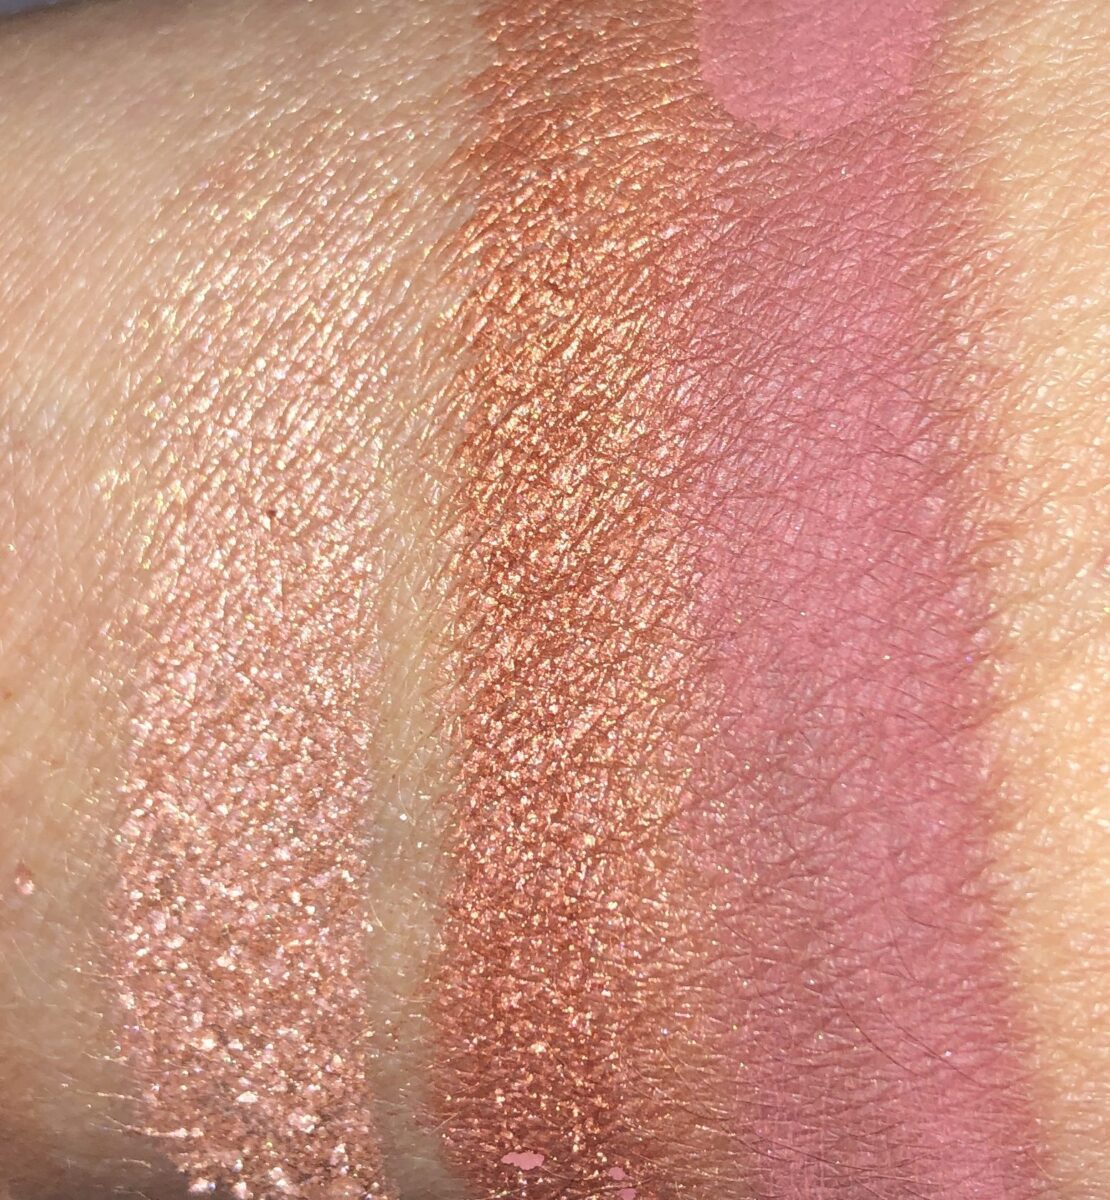 SWATCHES FOR LOVE GLOW EYES SHADES 1, 2, AND 3